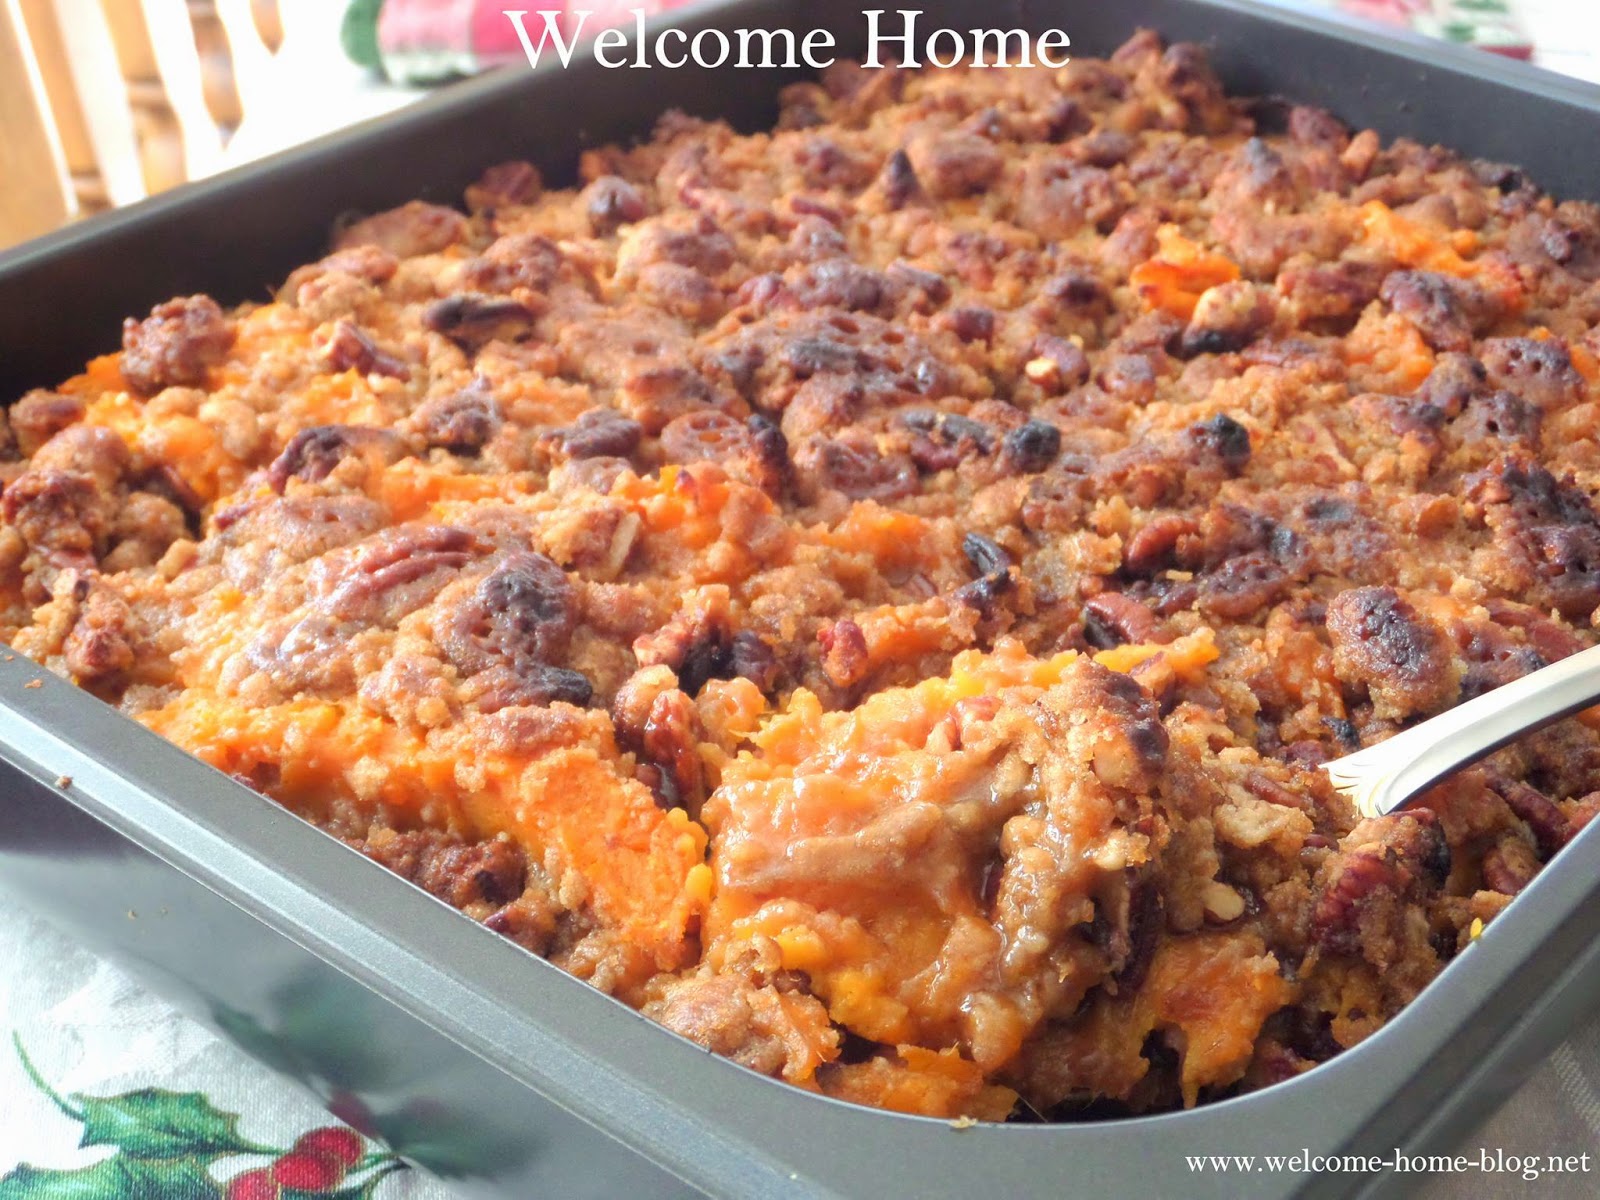 Home Blog ♥ Sweet Potato Casserole with Pecan Topping